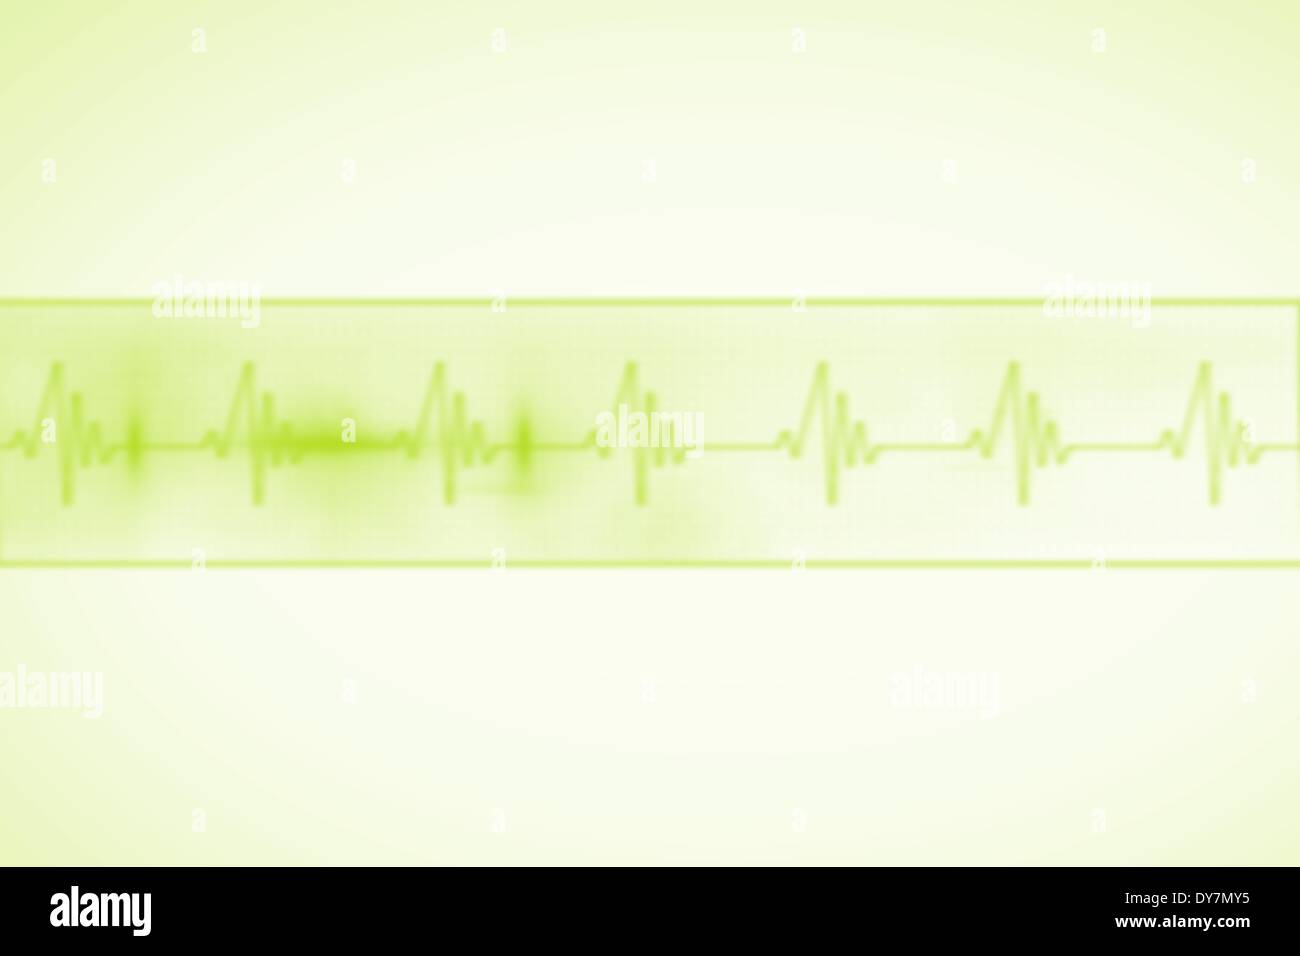 Medical background with green ecg line Stock Photo